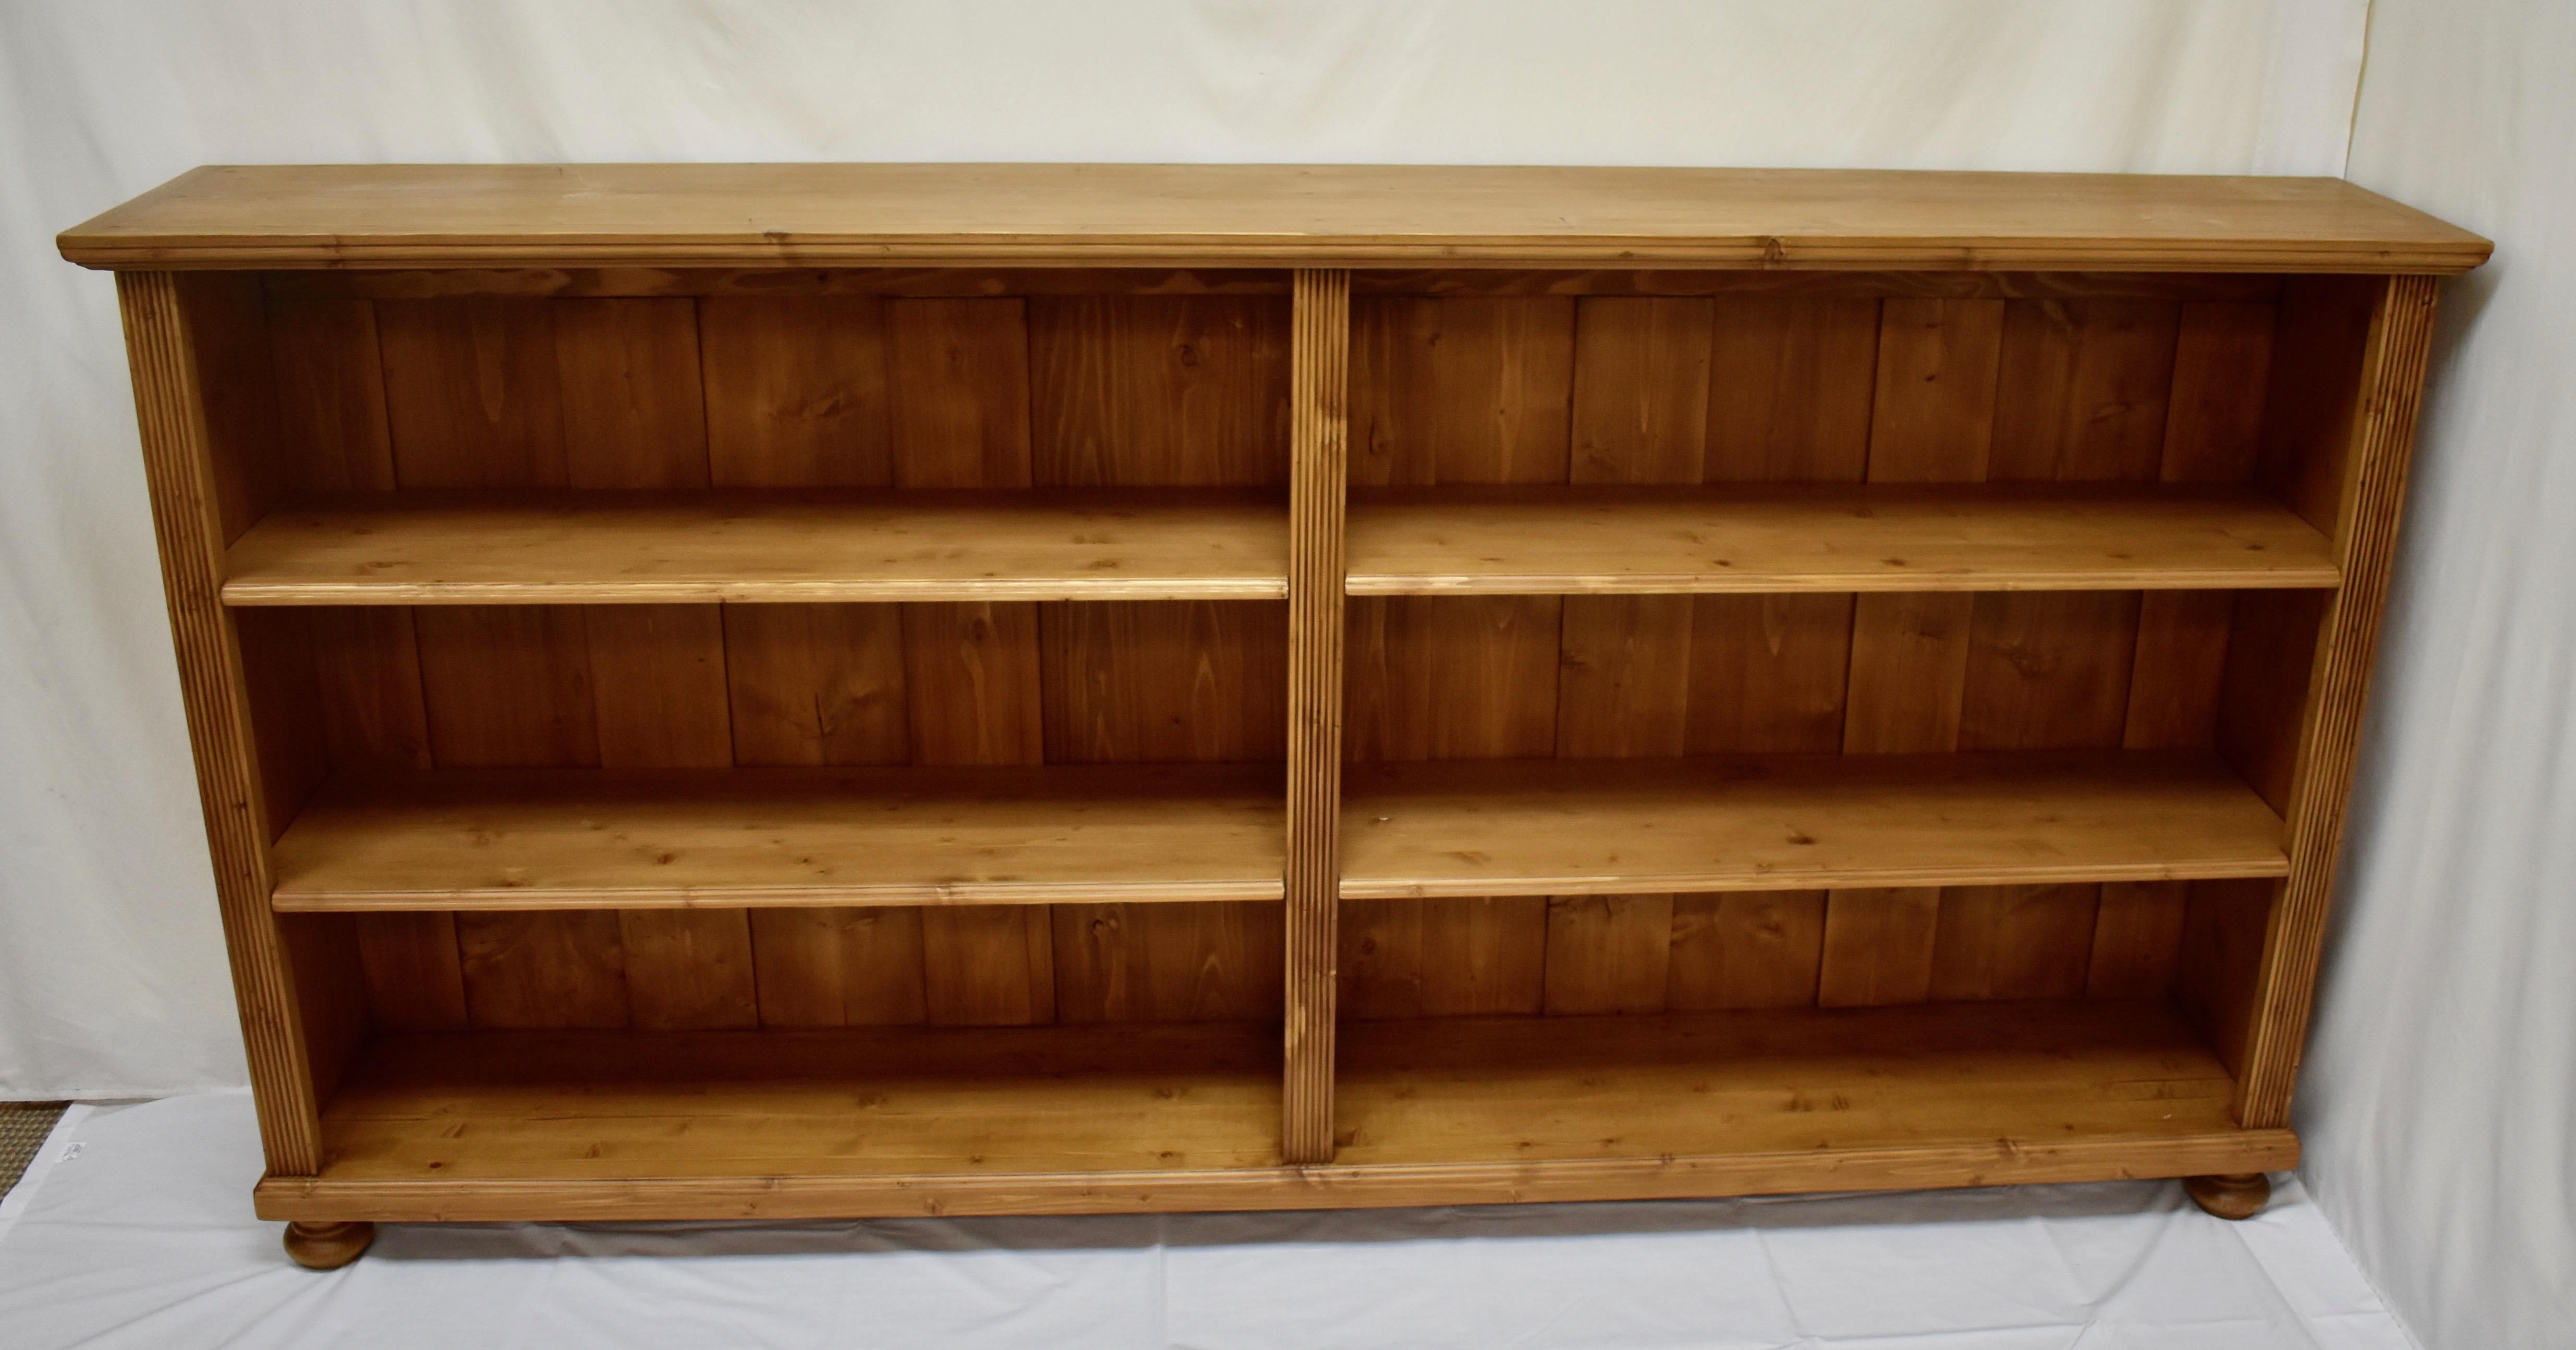 Antique pine bookcases can be hard to find and so can well-made reproductions. Using design features and methods of construction copied from our antique pine furniture, our workshop in Europe takes lightly-used reclaimed pine and fashions our